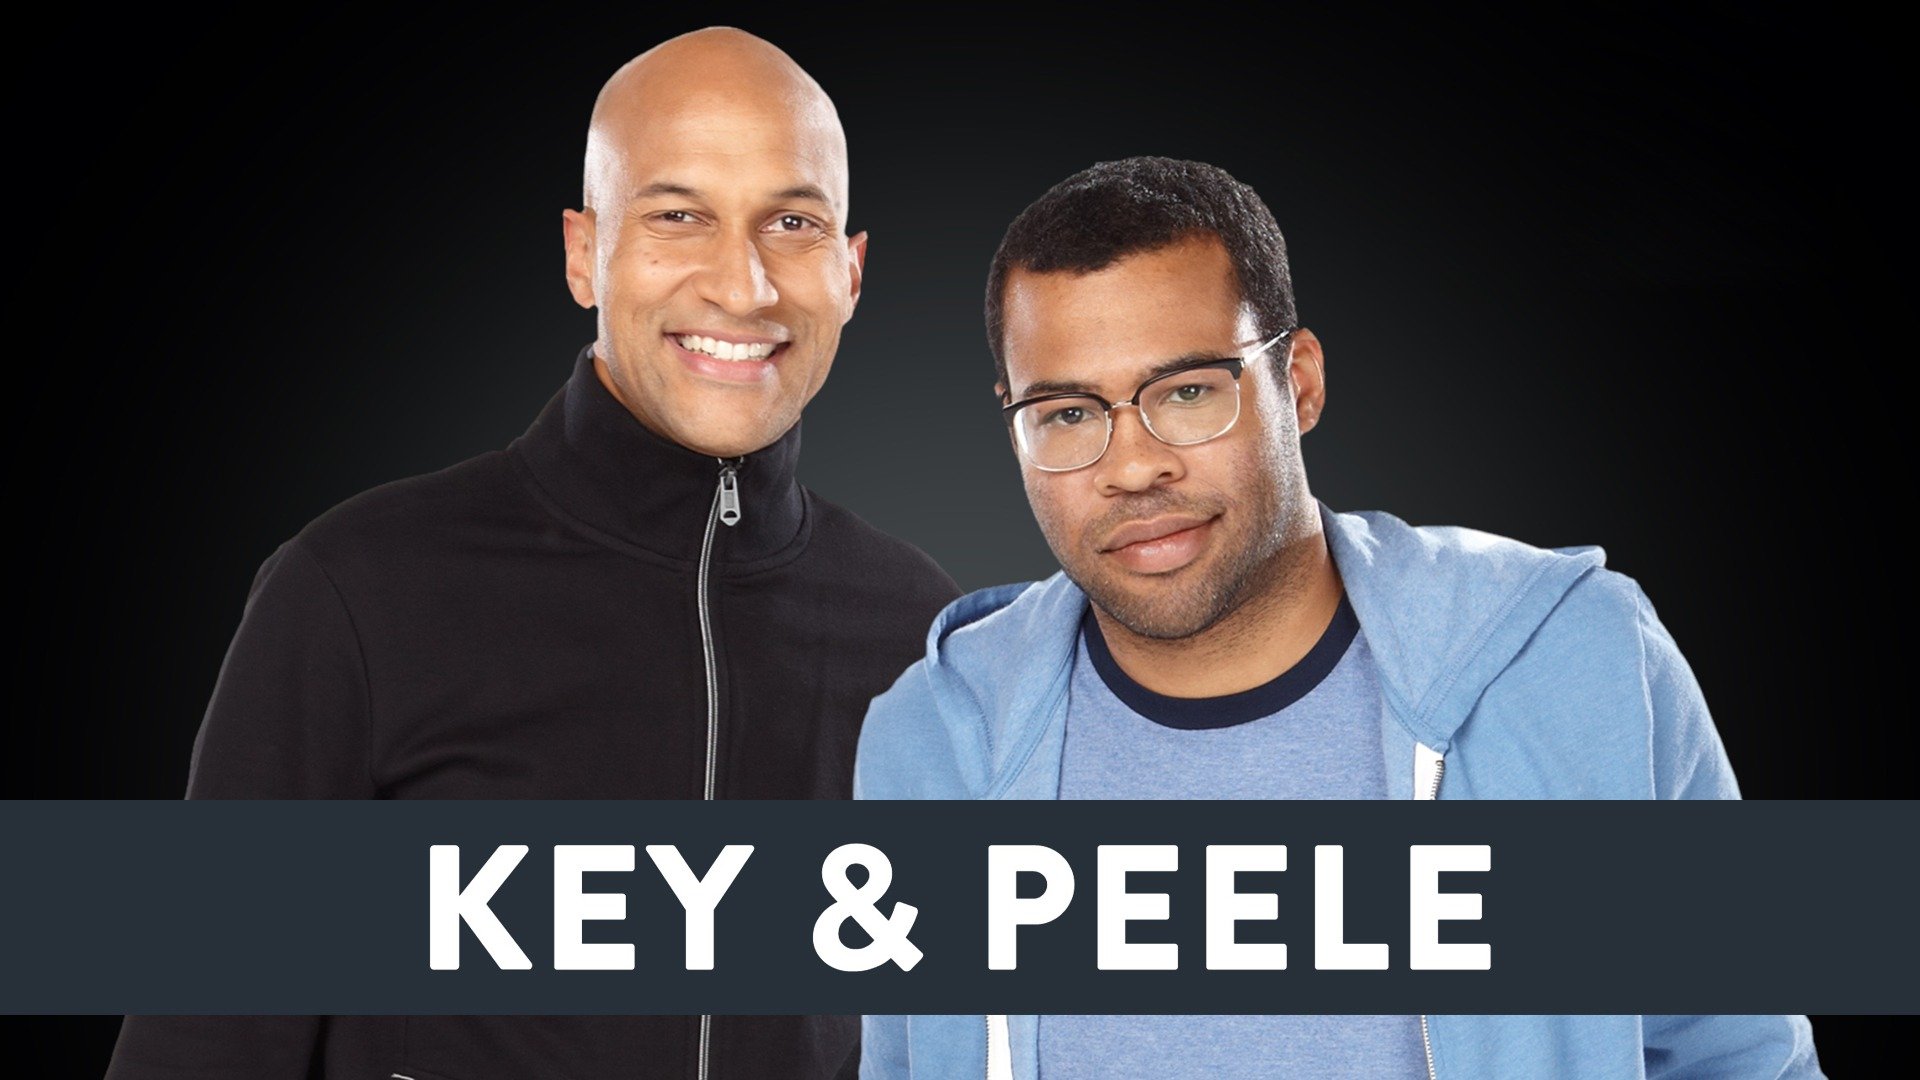 Key and peele these nuts